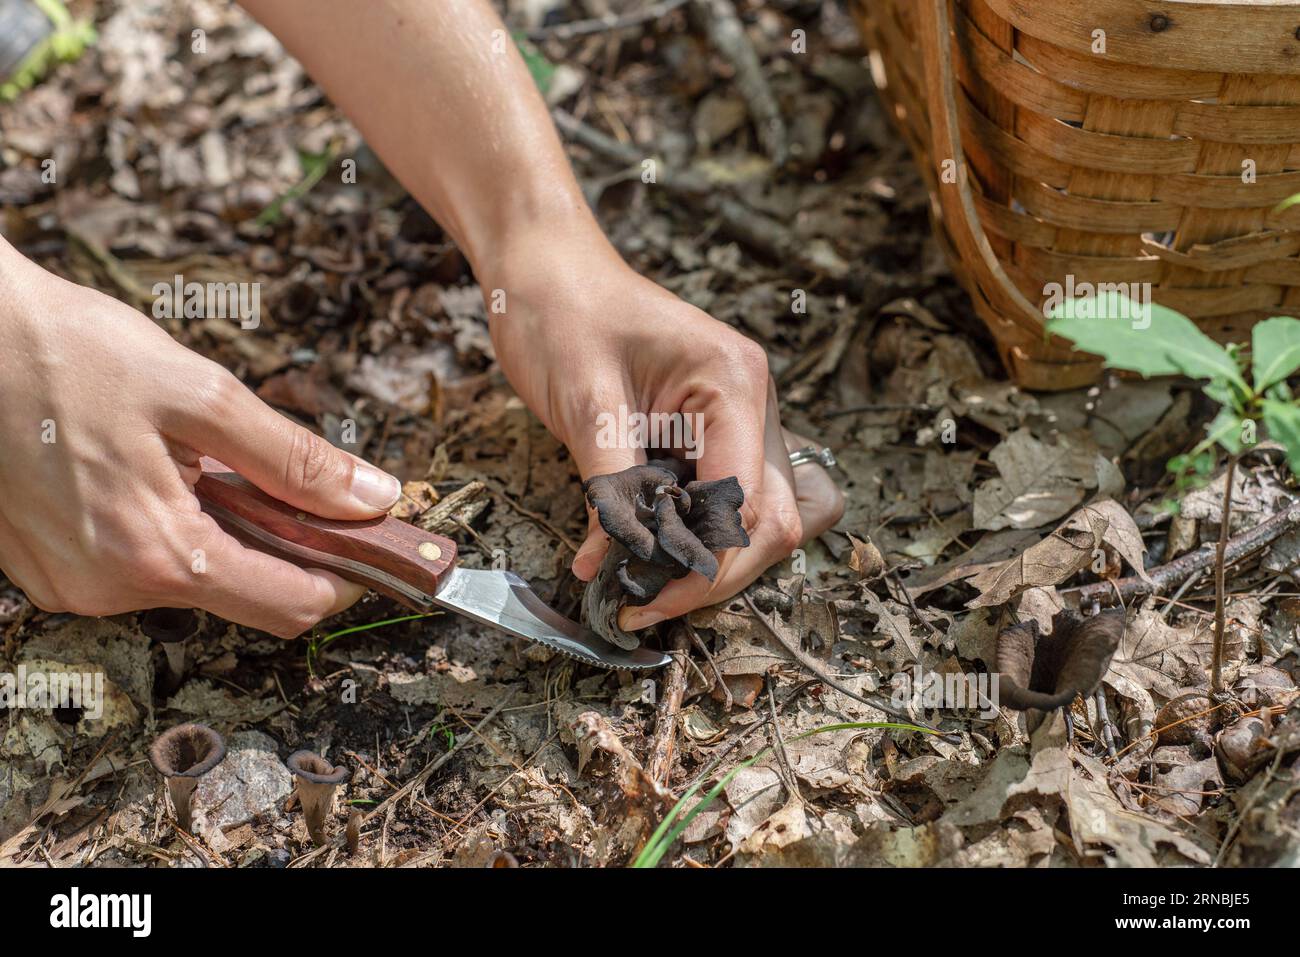 A woman foraging for black trumpet mushrooms with knife and basket Stock Photo